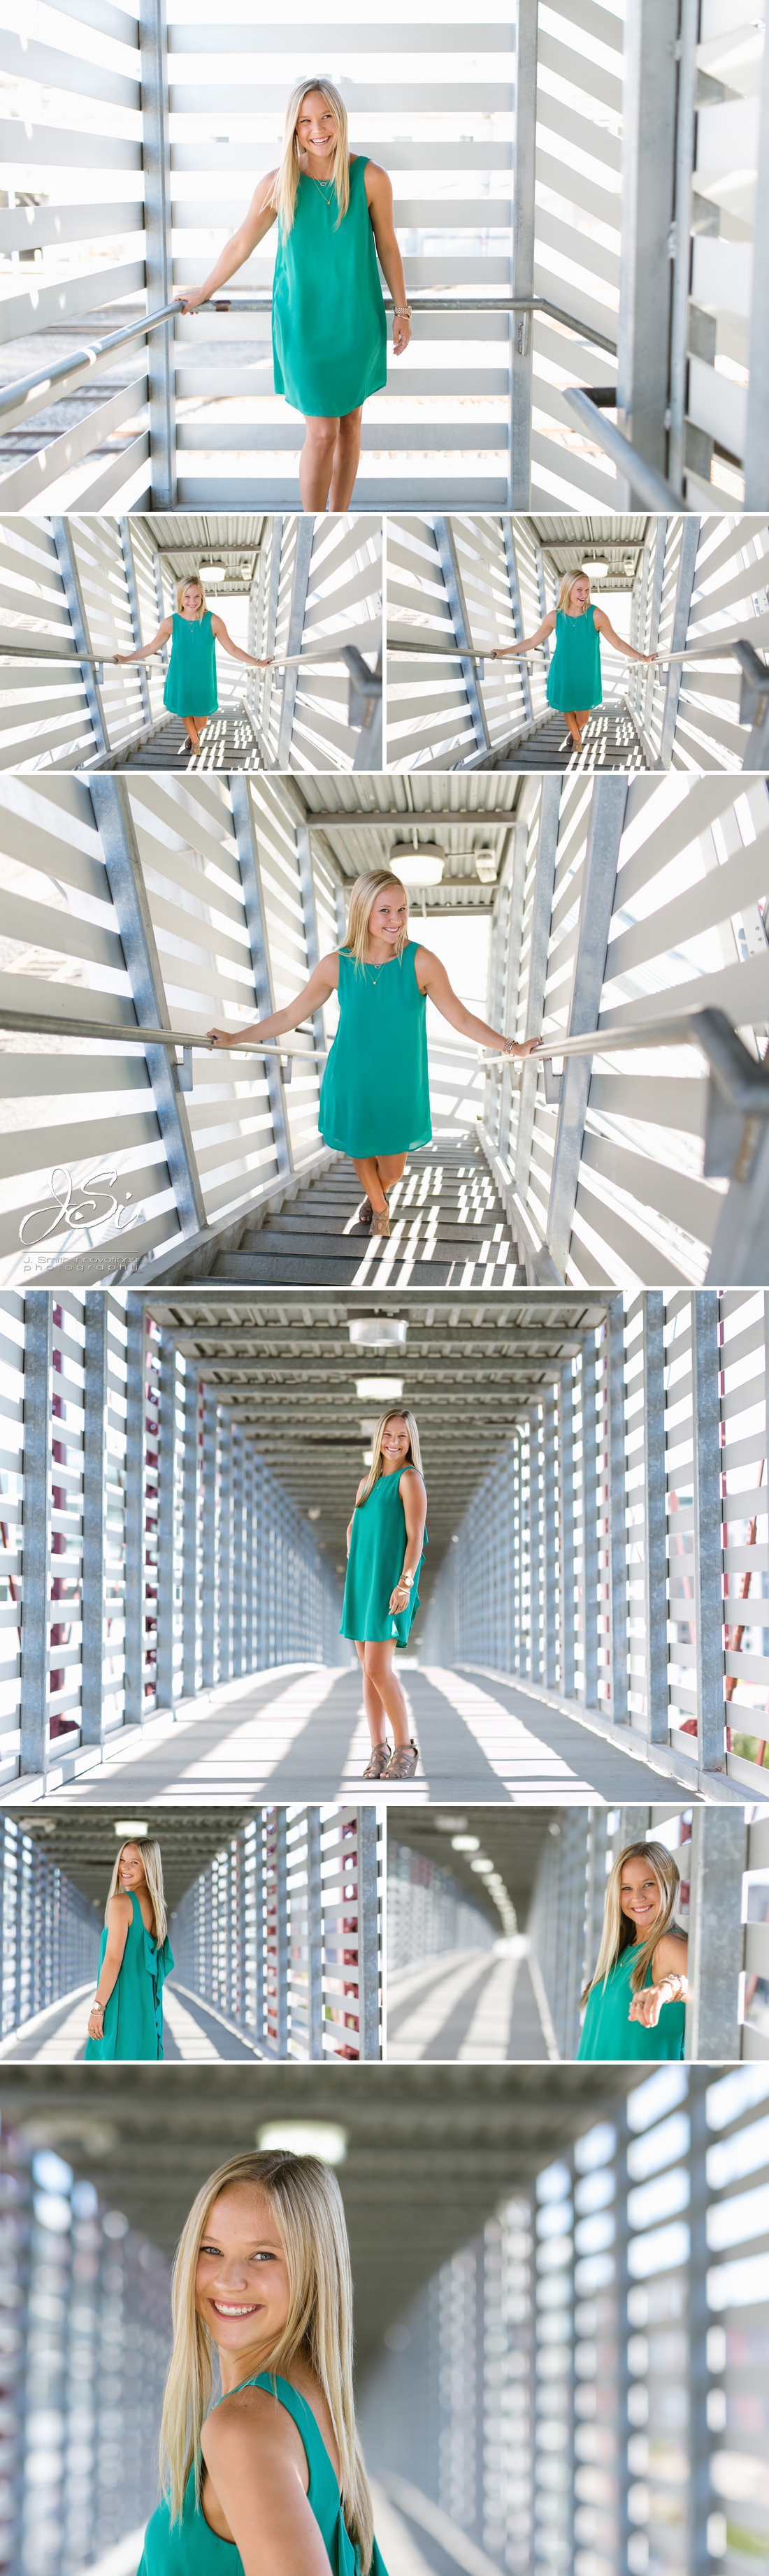 Kansas City Crossroads fun stunning girl senior pictures session picture